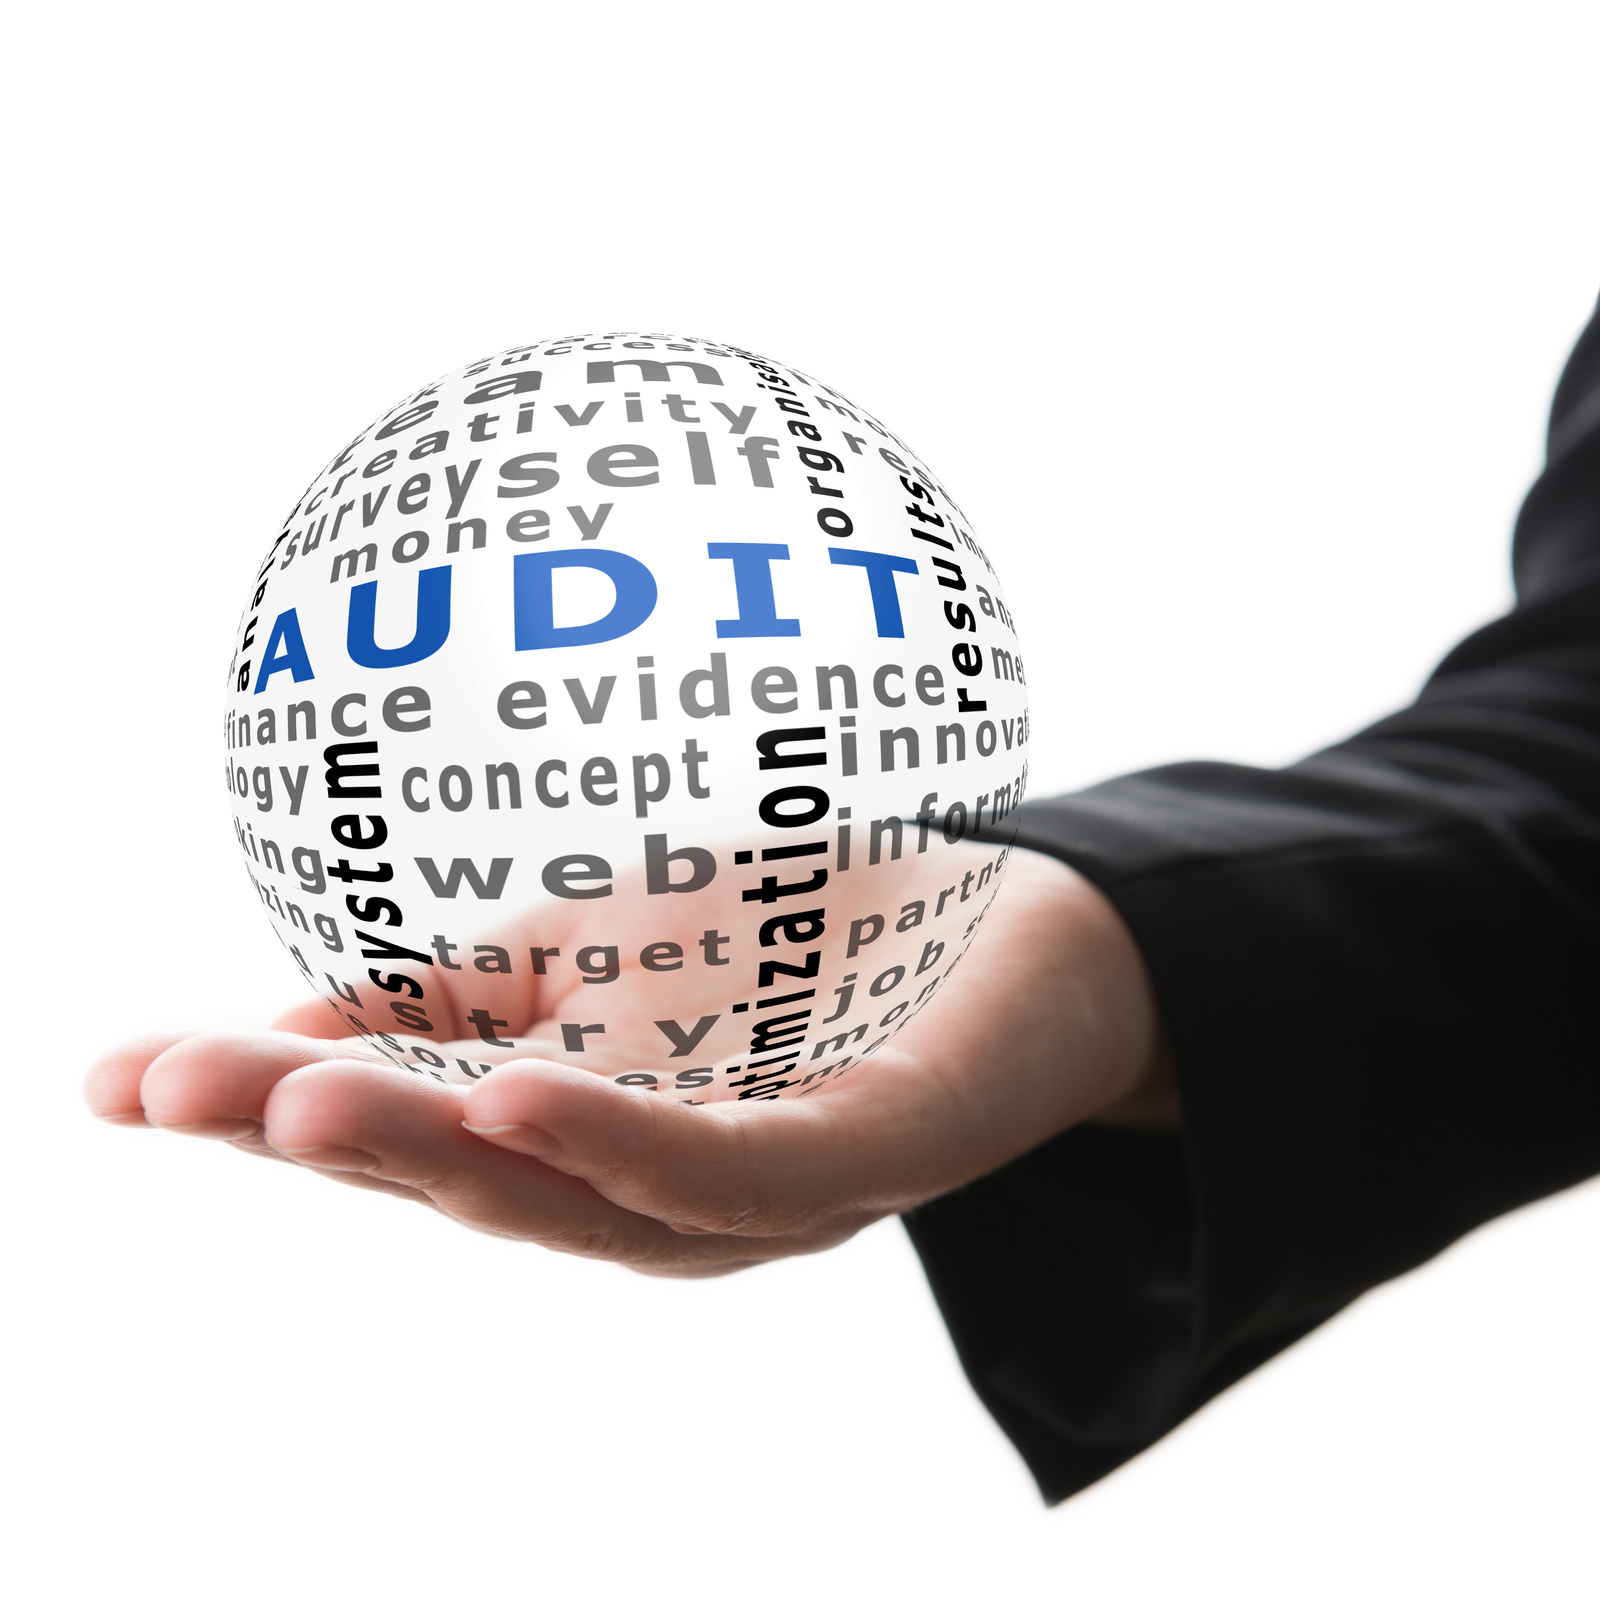 Concept of audit in business